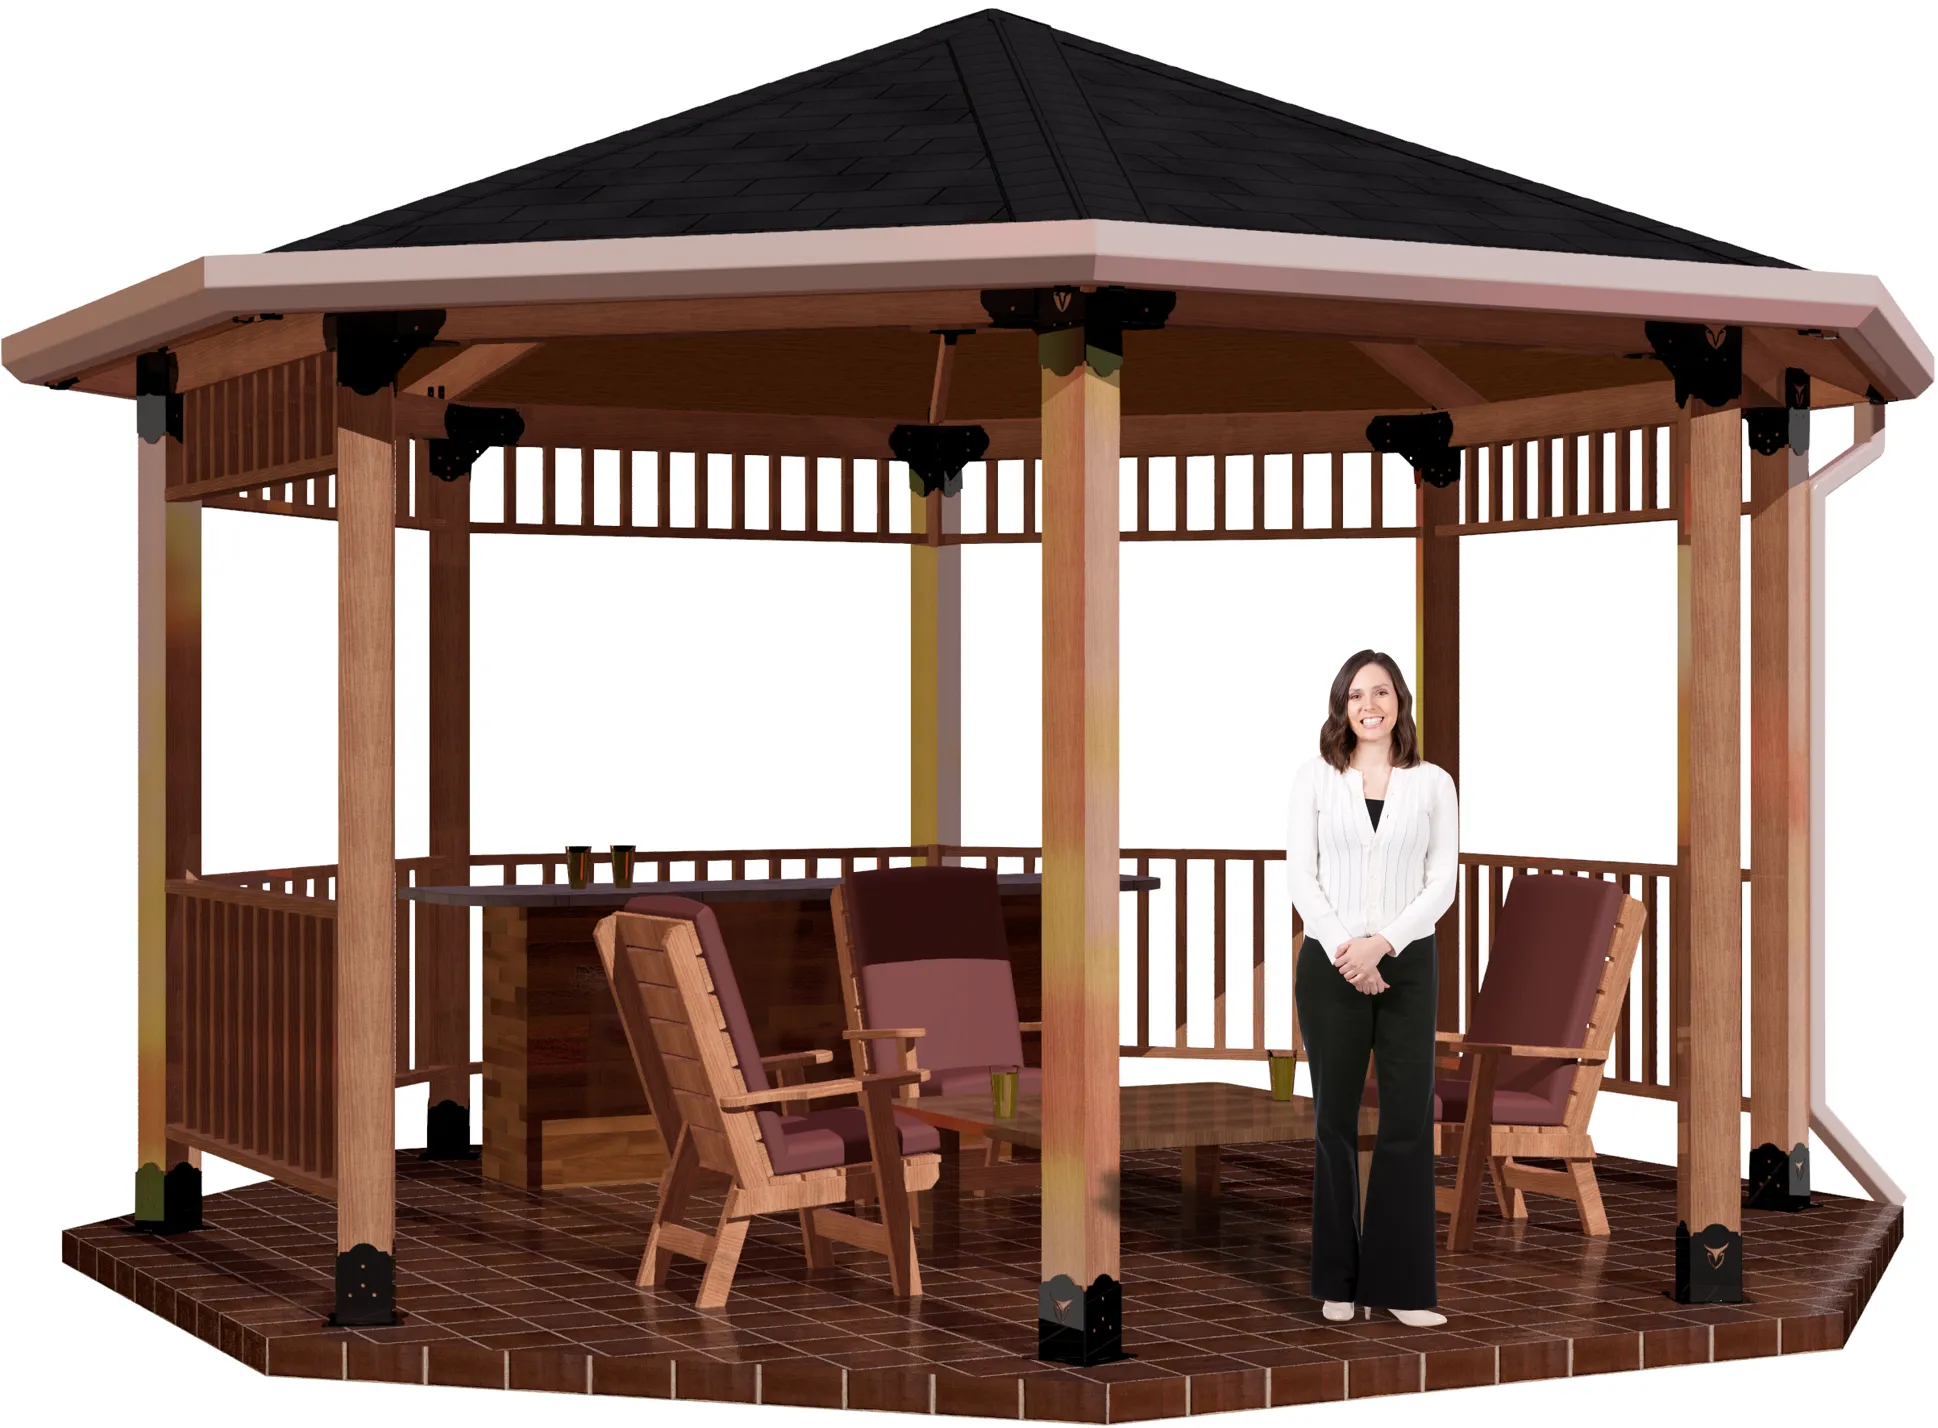 view of a 6x6 octagon patio cover with solid roof with a bar, barbecue and casual furniture and a girl standing inside